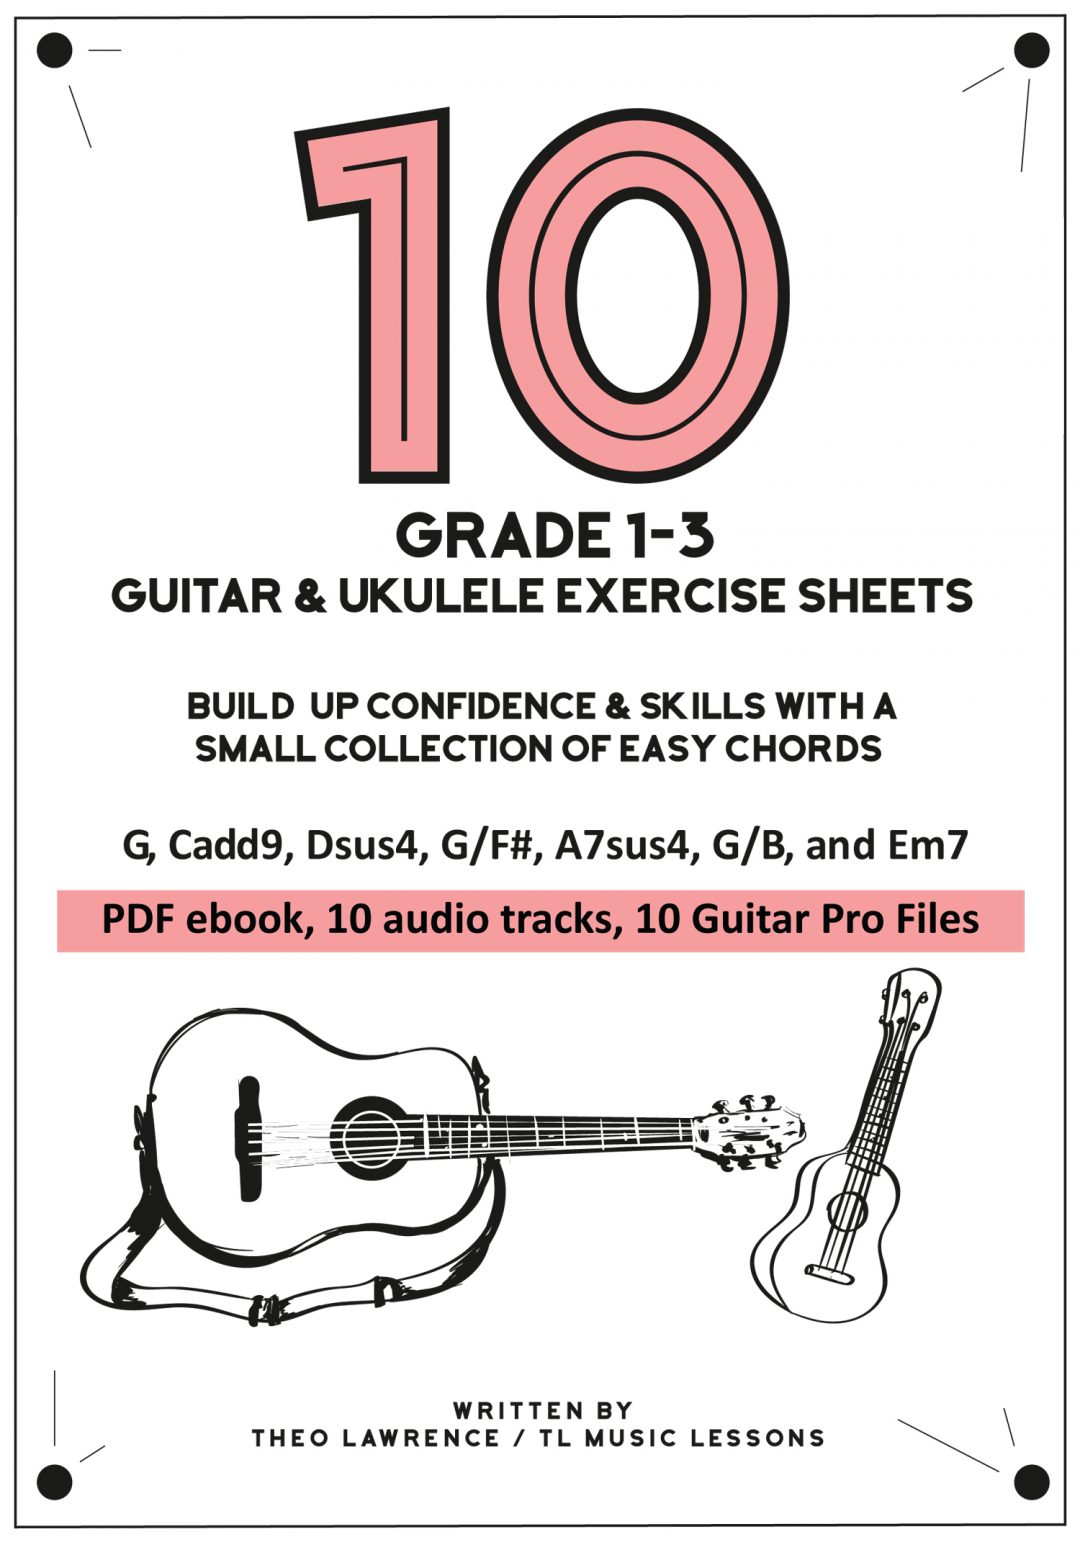 (Free ebook) – 10 Grade 1-3 Guitar & Ukulele Chord Exercise Sheets – Build up Confidence & Skills with a Small Collection of Easy Chords